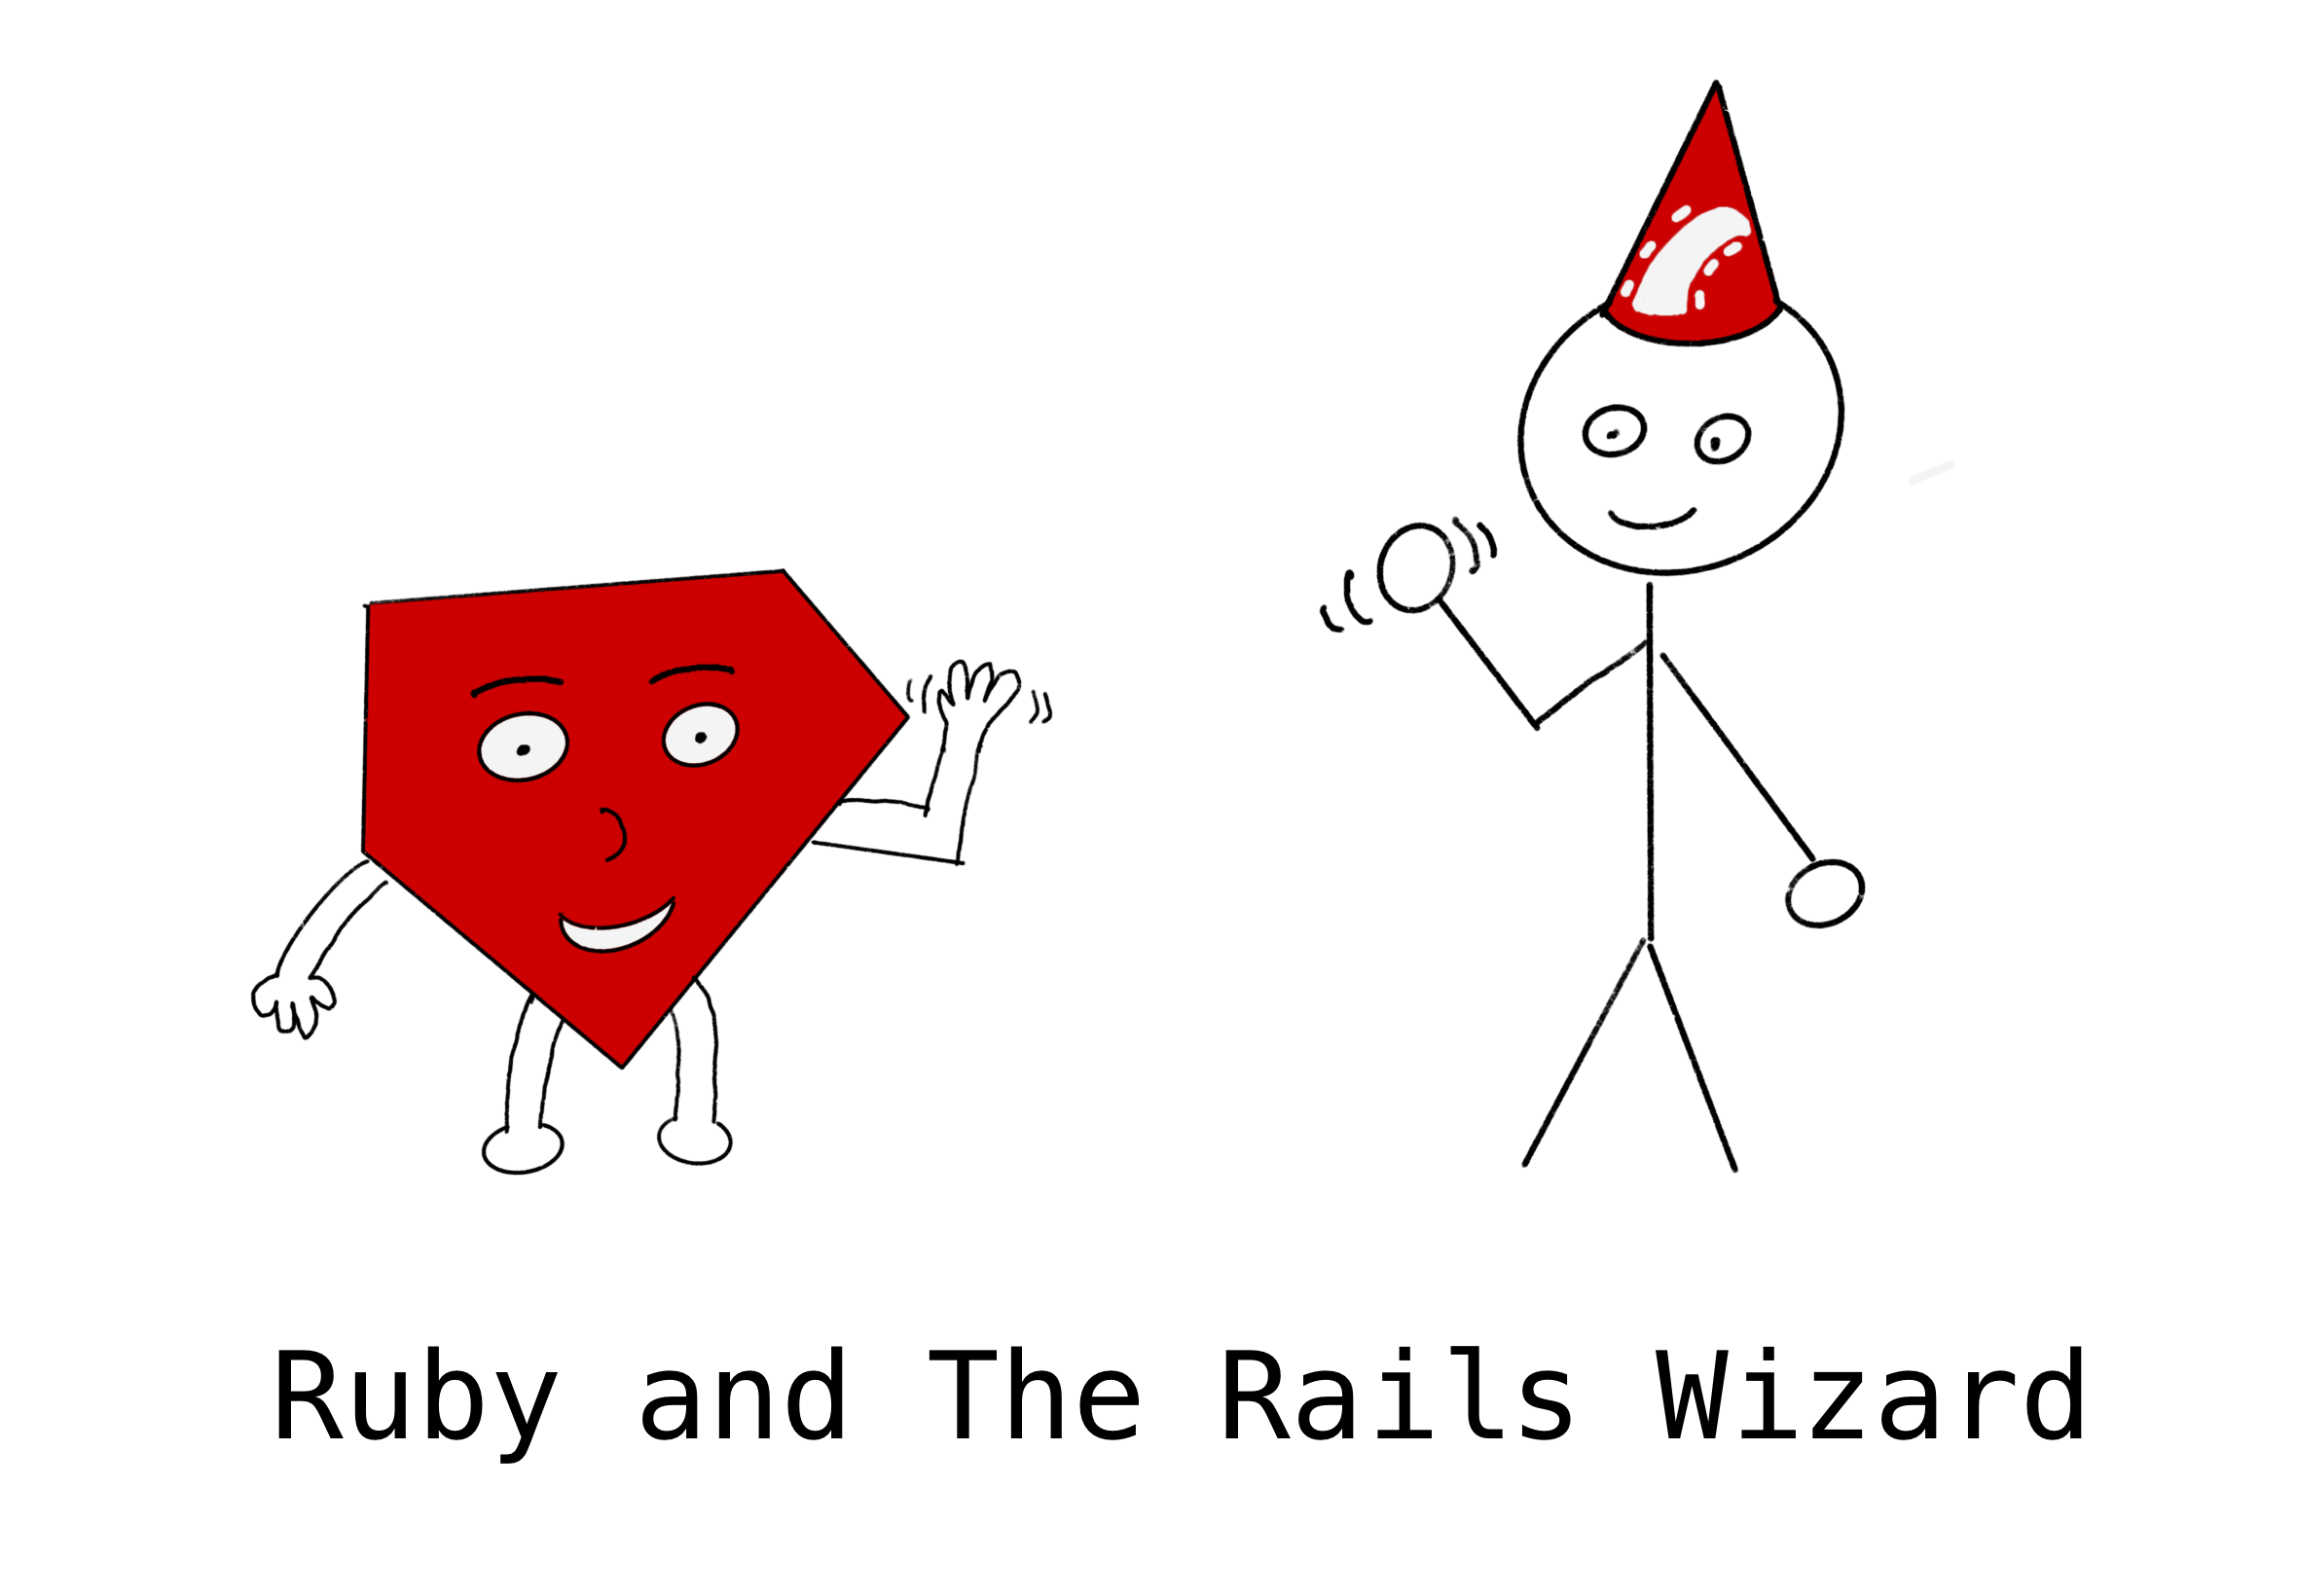 Ruby and The Rails Wizard